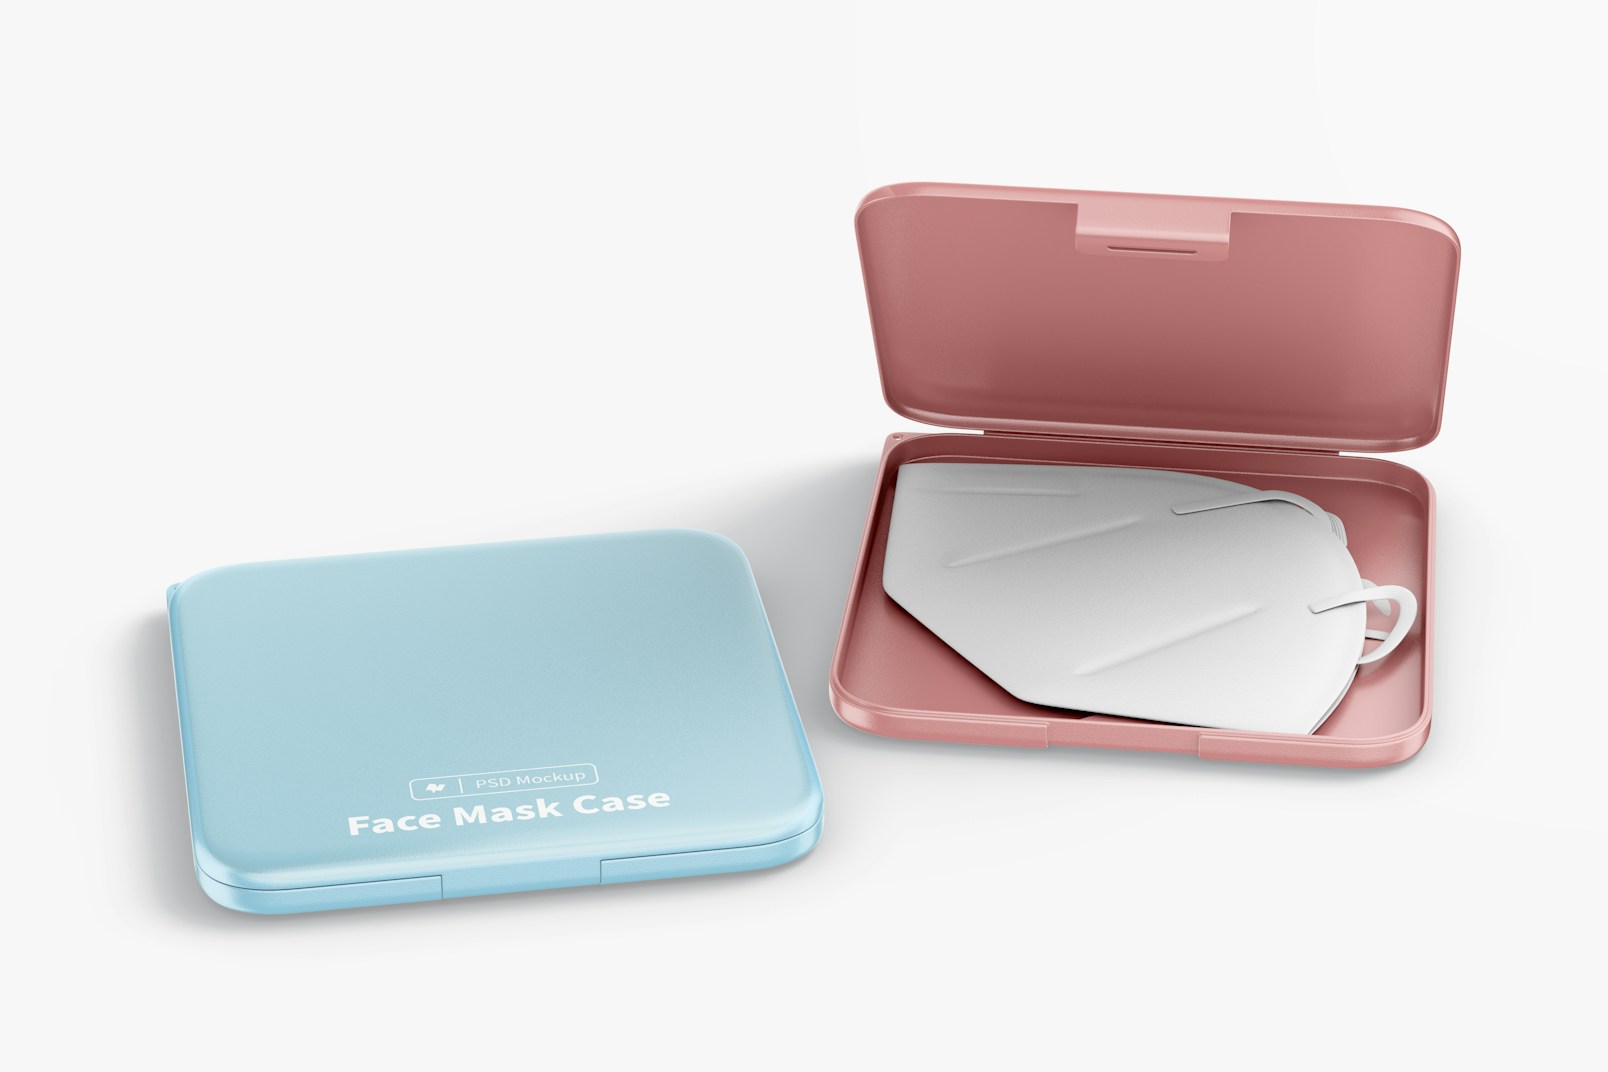 Face Mask Case Mockup, Opened and Closed